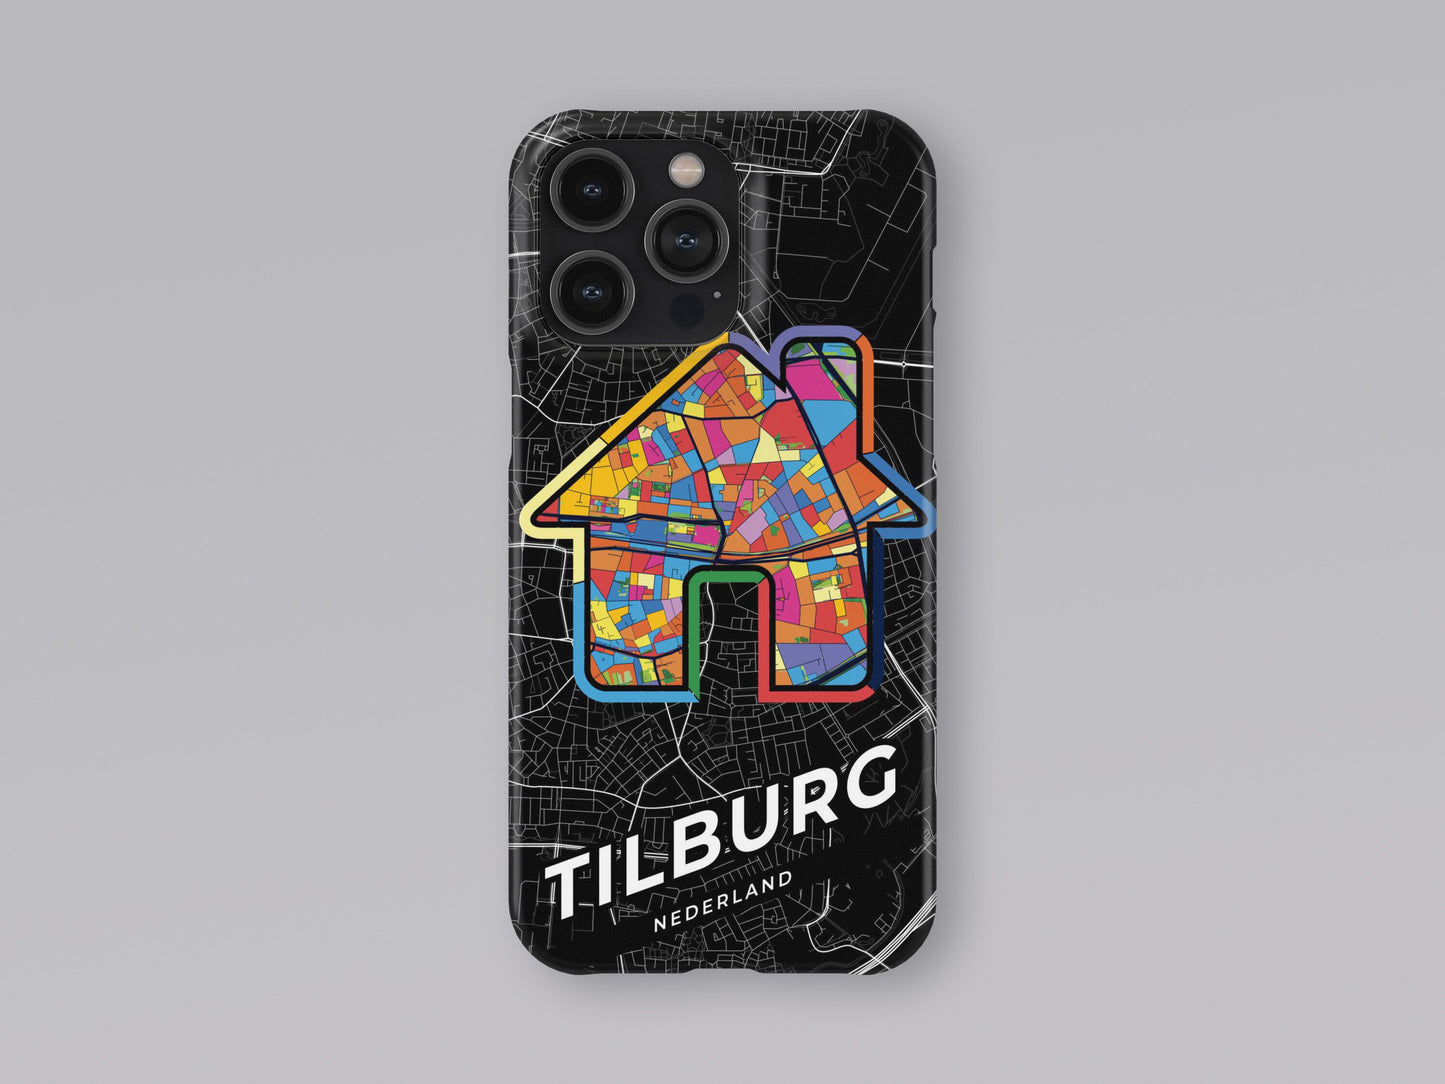 Tilburg Netherlands slim phone case with colorful icon 3